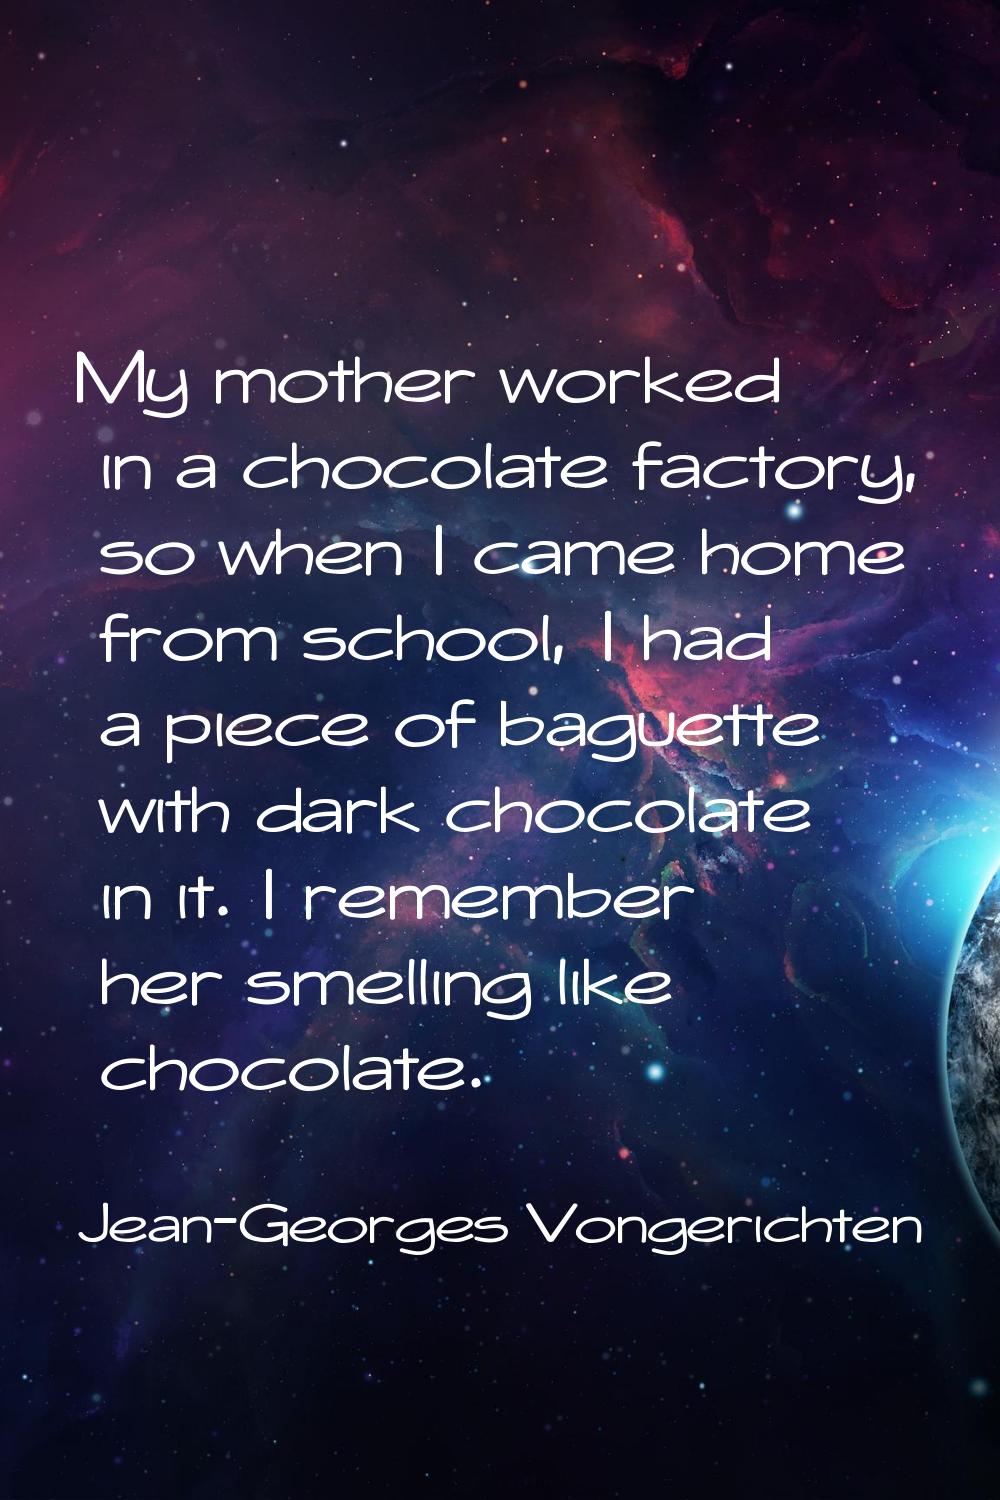 My mother worked in a chocolate factory, so when I came home from school, I had a piece of baguette